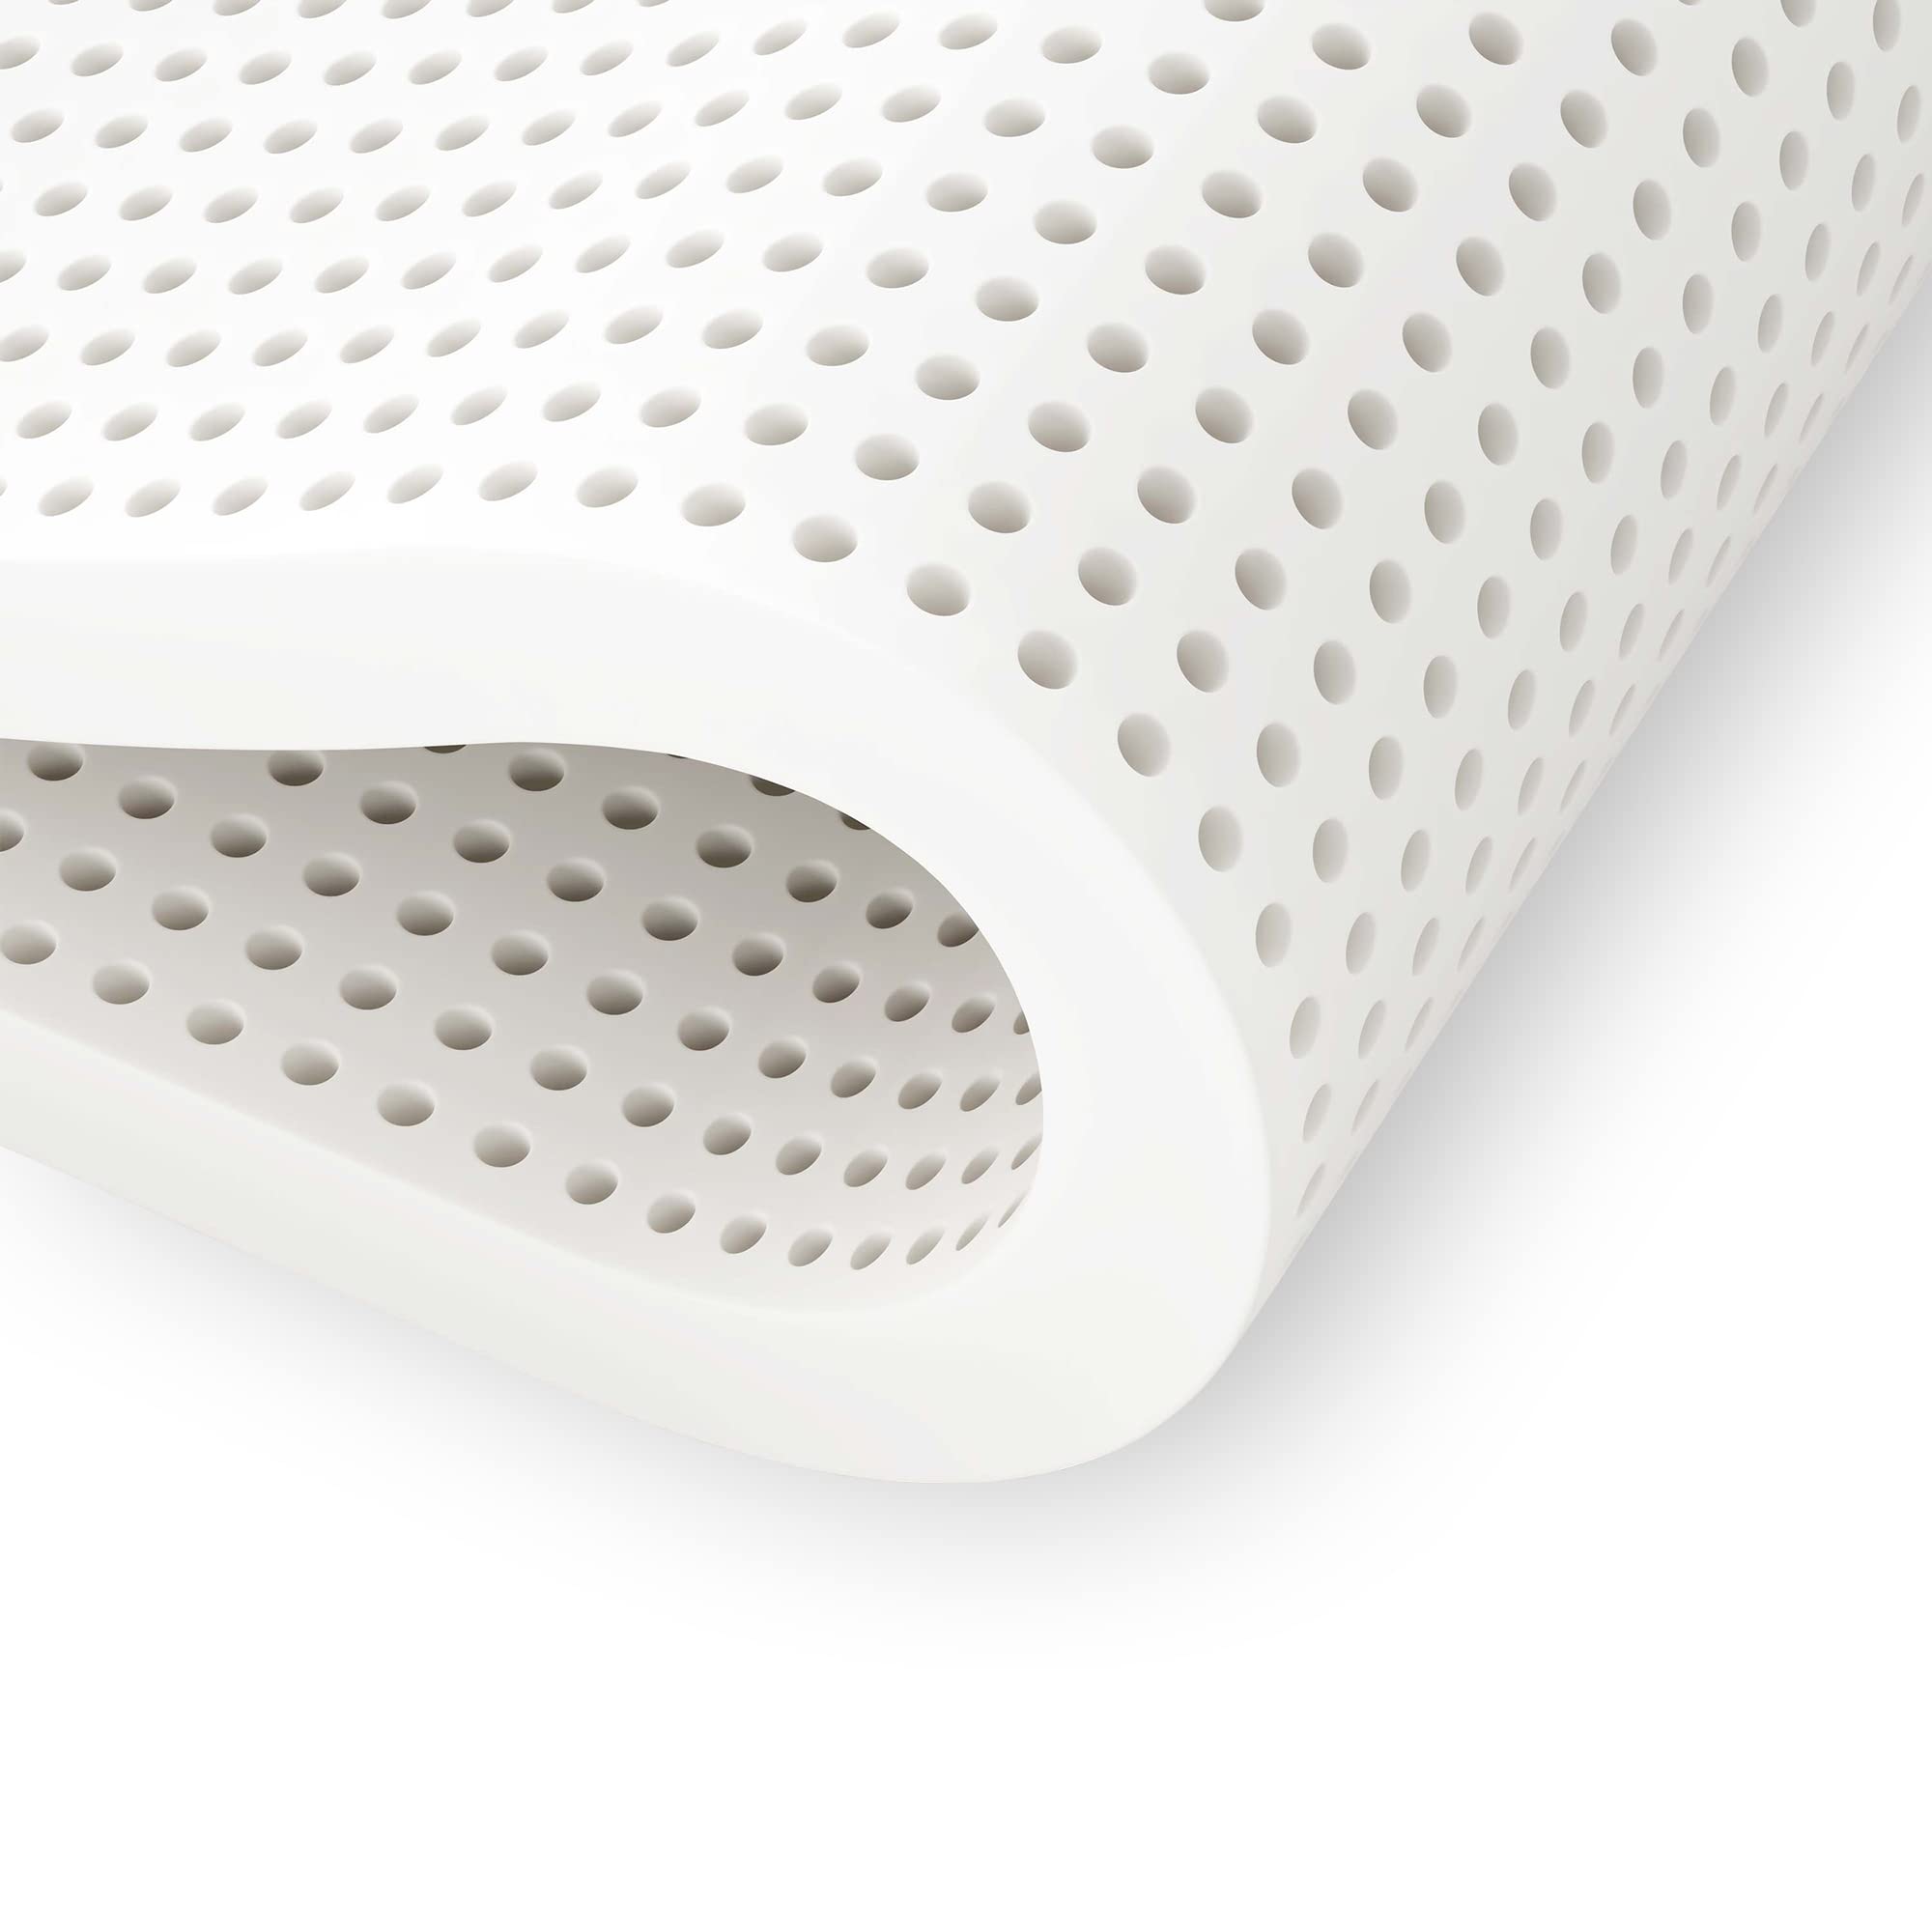 PlushBeds 3" Extra-Firm Topper| 100% Natural Talalay Latex| Made in The USA| Luxurious Comfort | Soothing Pressure Point Relief